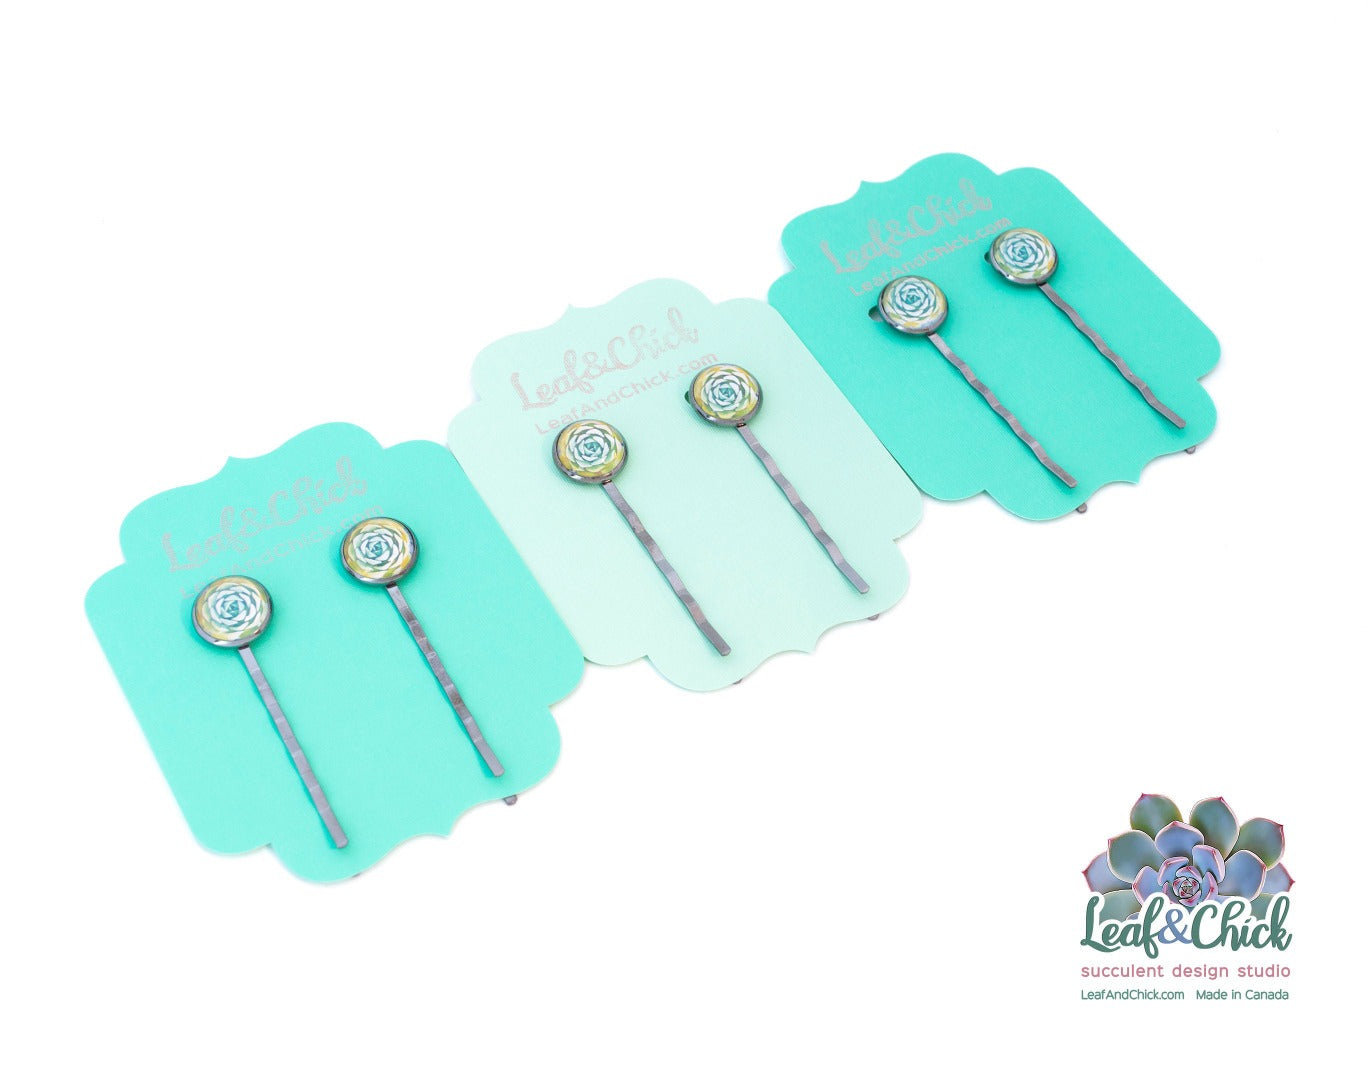 fancy jewelled bobby pins in a gunmetal coloured base with echeveria succulent art